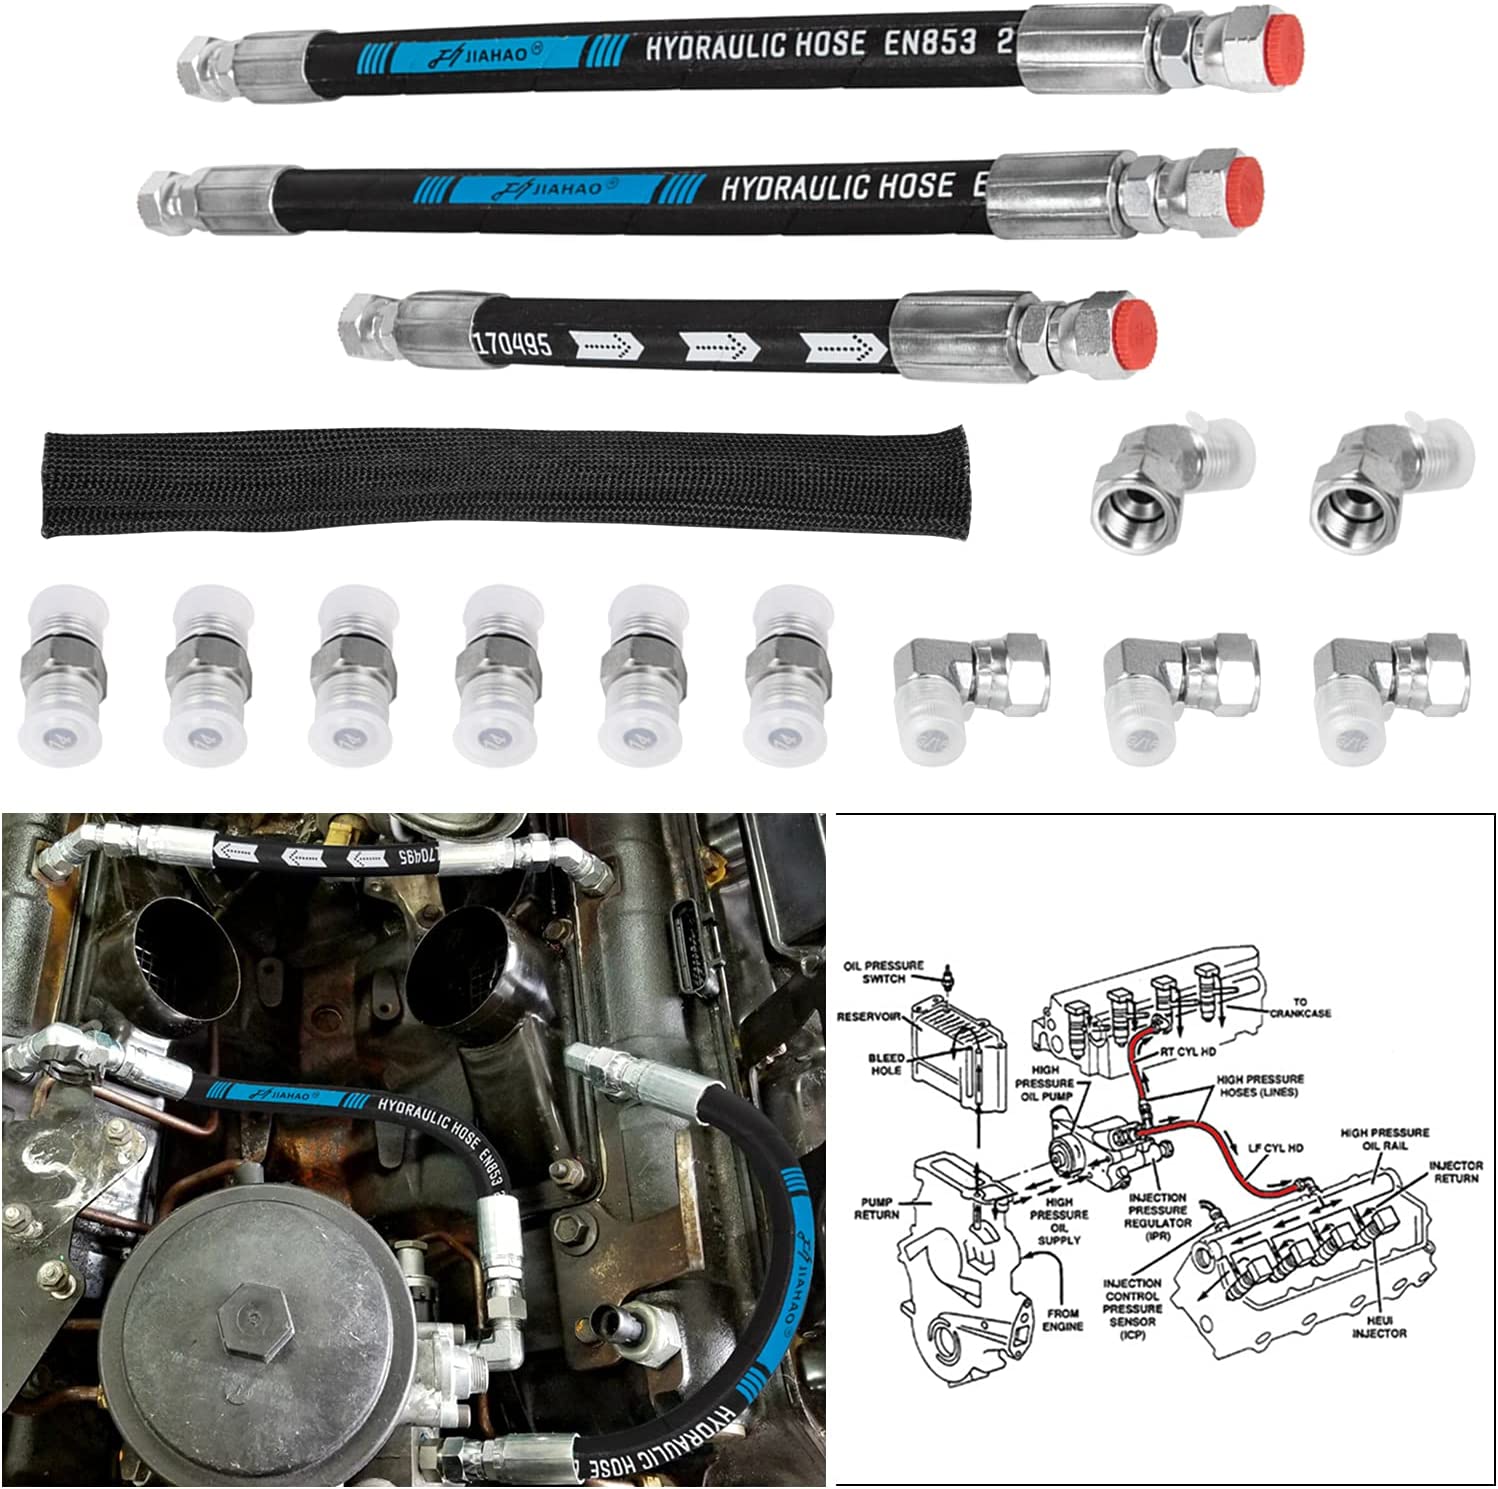 High Pressure Oil Pump HPOP Hoses Lines Kit With Crossover For Ford Powerstroke